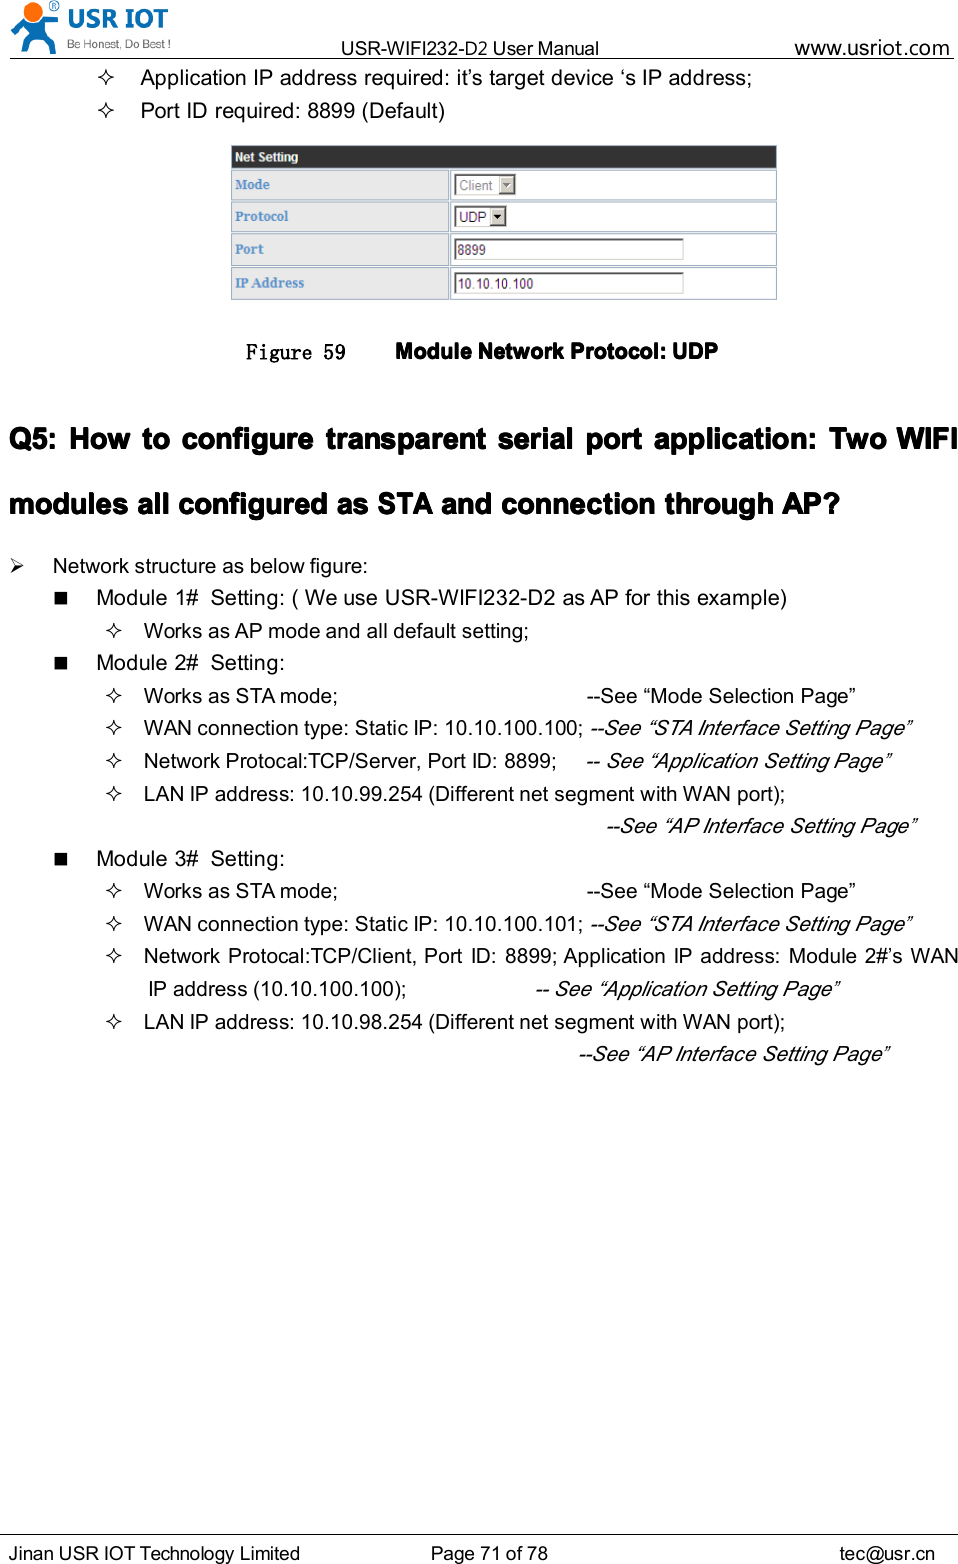 USR-WIFI232- D2 User Manual www.usr iot .comJinan USR IOT Technology Limited Page 71 of 78 tec@usr.cnApplication IP address required: it ’ s target device ‘ s IP address;Port ID required: 8899 (Default)Figure 59 ModuleModuleModuleModule NetworkNetworkNetworkNetwork Protocol:Protocol:Protocol:Protocol: UDPUDPUDPUDPQ5:Q5:Q5:Q5: HowHowHowHow totototo configureconfigureconfigureconfigure transparenttransparenttransparenttransparent serialserialserialserial portportportport application:application:application:application: TwoTwoTwoTwo WIFIWIFIWIFIWIFImodulesmodulesmodulesmodules allallallall configuredconfiguredconfiguredconfigured asasasasSTASTASTASTAandandandand connectionconnectionconnectionconnection throughthroughthroughthrough AP?AP?AP?AP?Network structure as below figure:Module 1# Setting: ( We use USR-WIFI232-D2 as AP for this example)Works as AP mode and all default setting;Module 2# Setting:Works as STA mode; --See “ Mode Selection Page ”WAN connection type: Static IP: 10.10.100.100;--See “ STA Interface Setting Page”Network Protocal:TCP/Server, Port ID: 8899;-- See “ Application Setting Page”LAN IP address: 10.10.99.254 (Different net segment with WAN port);--See “ AP Interface Setting Page”Module 3# Setting:Works as STA mode; --See “ Mode Selection Page ”WAN connection type: Static IP: 10.10.100.101;--See “ STA Interface Setting Page”Network Protocal:TCP/Client, Port ID: 8899; Application IP address: Module 2#’s WANIP address (10.10.100.100);-- See “ Application Setting Page”LAN IP address: 10.10.98.254 (Different net segment with WAN port);--See “ AP Interface Setting Page”